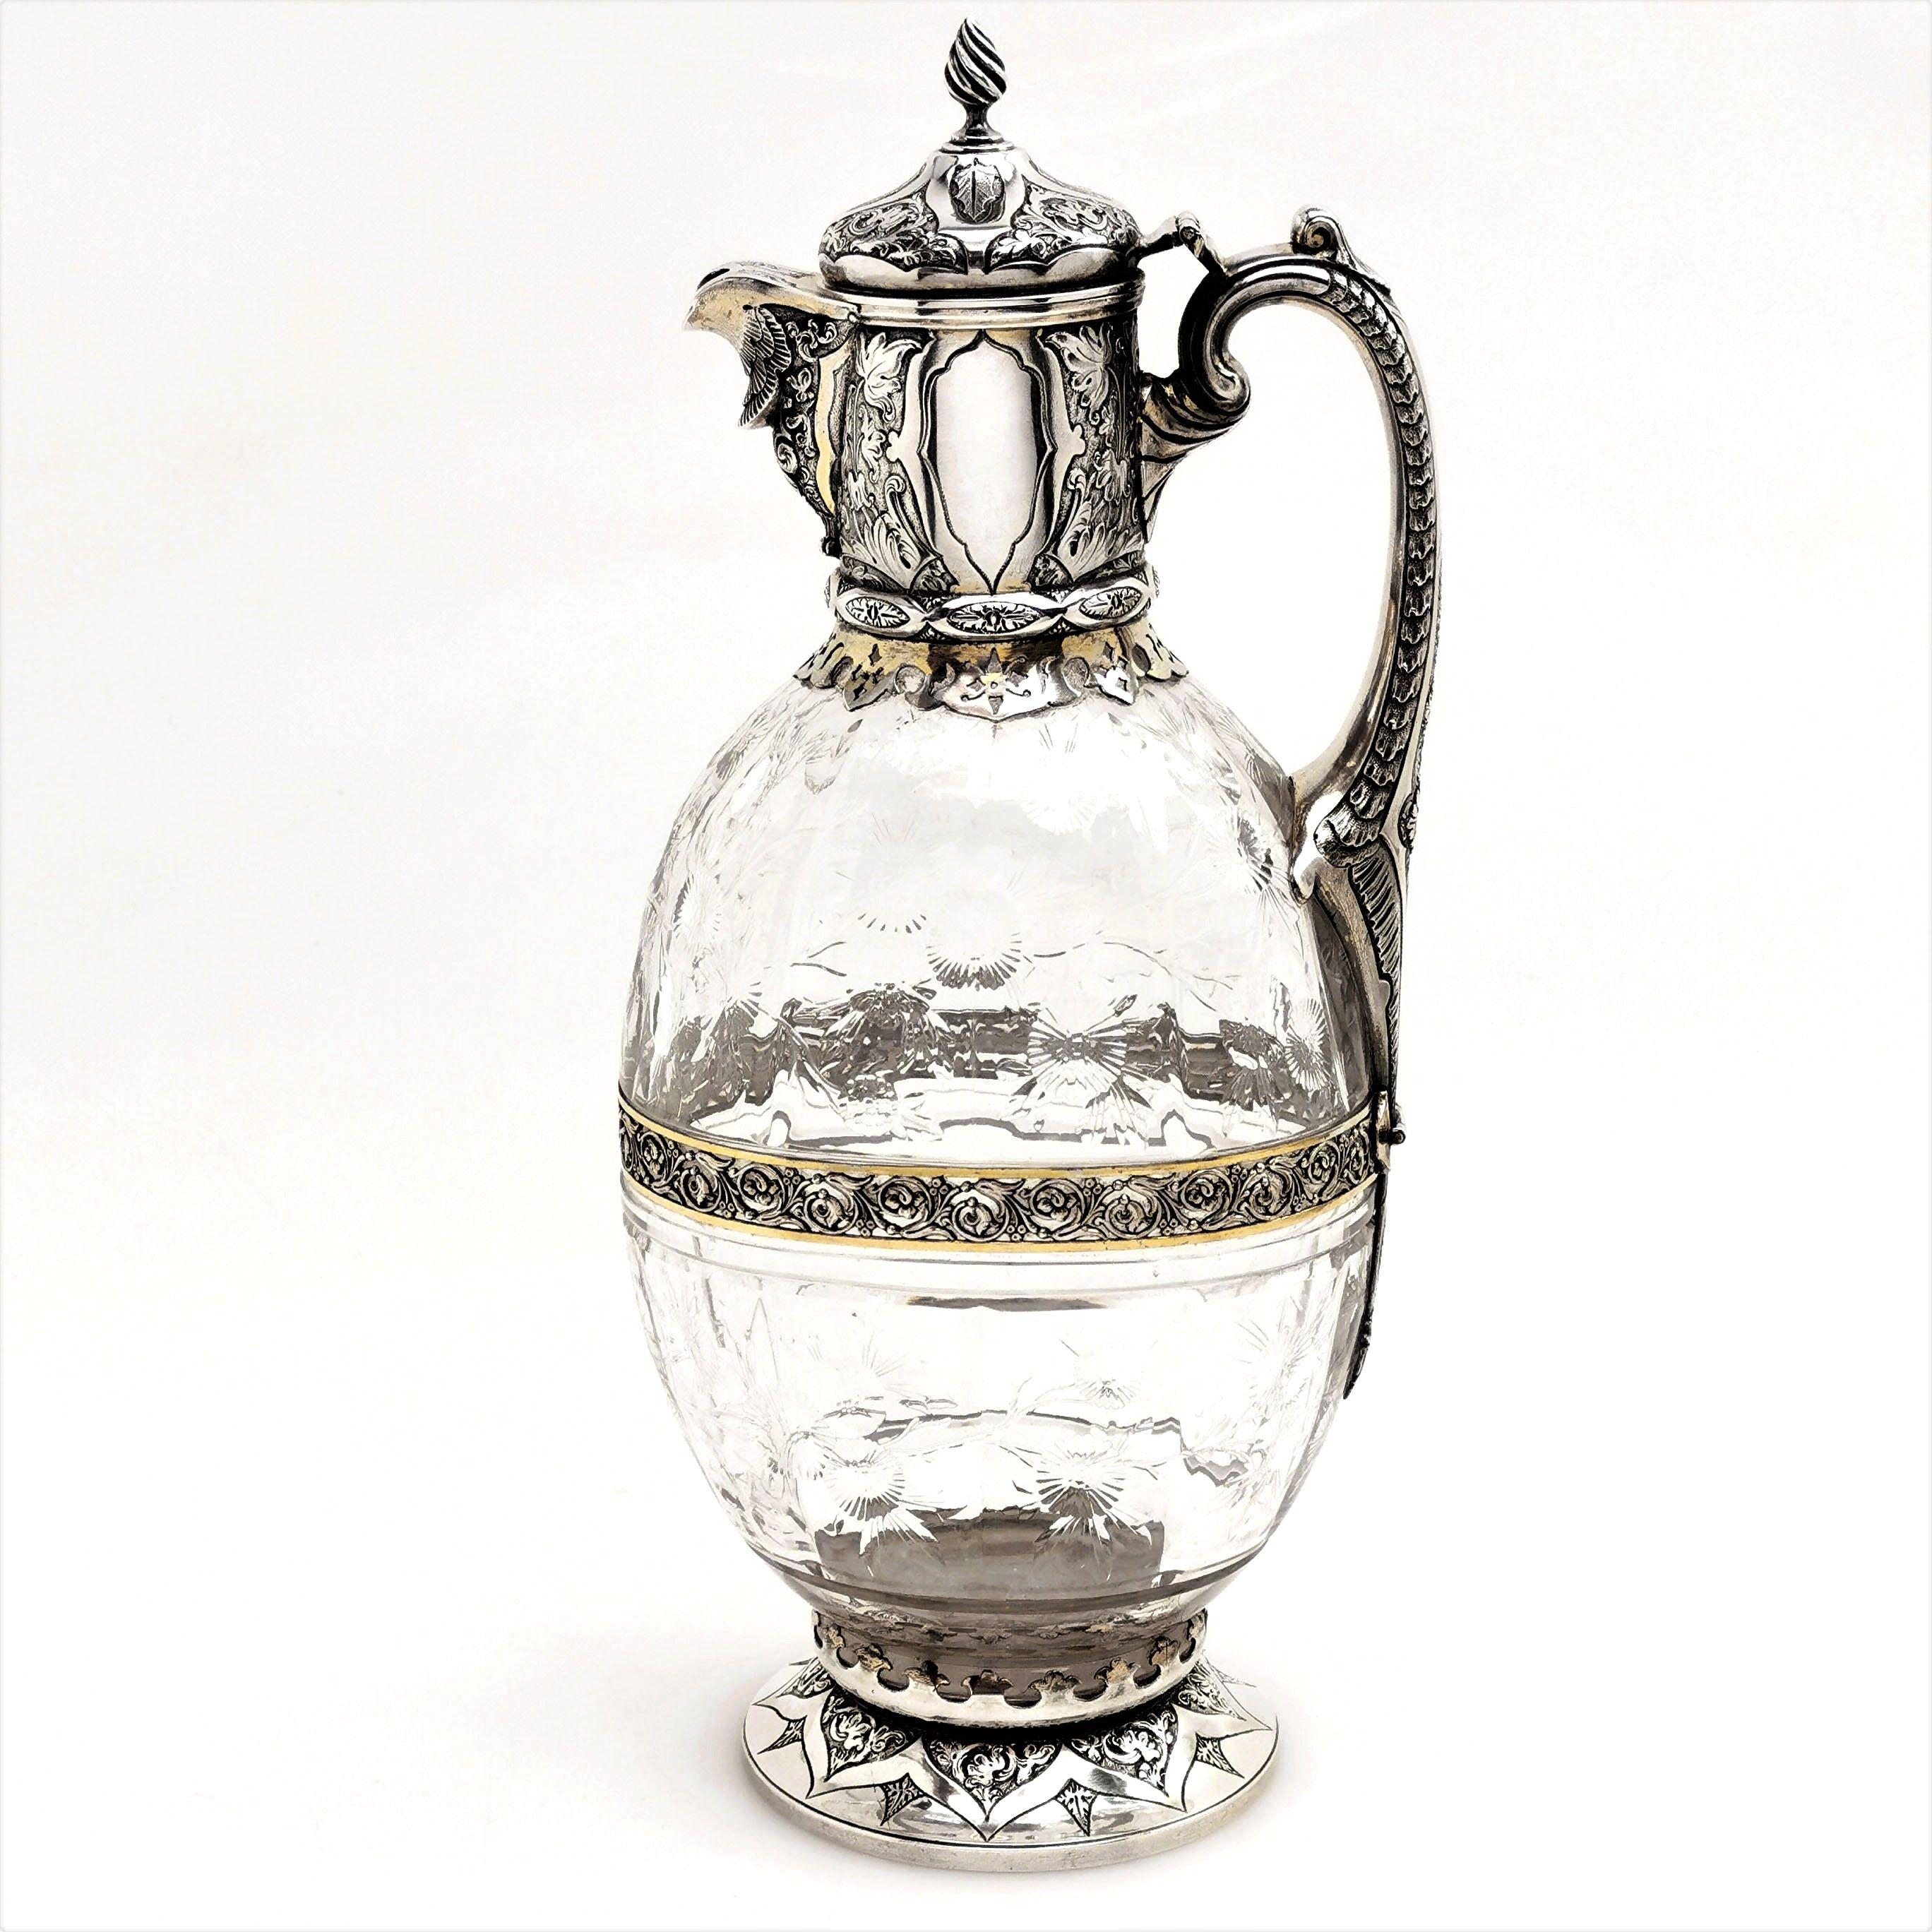 A beautiful antique Victorian Silver and parcel-gilt cut Glass Claret Jug or Wine Decanter.
The body of the Jug is cut in a lovely floral pattern and the silver is embellished with a chased design surrounding a pair of cartouches. 
 
 Made in London